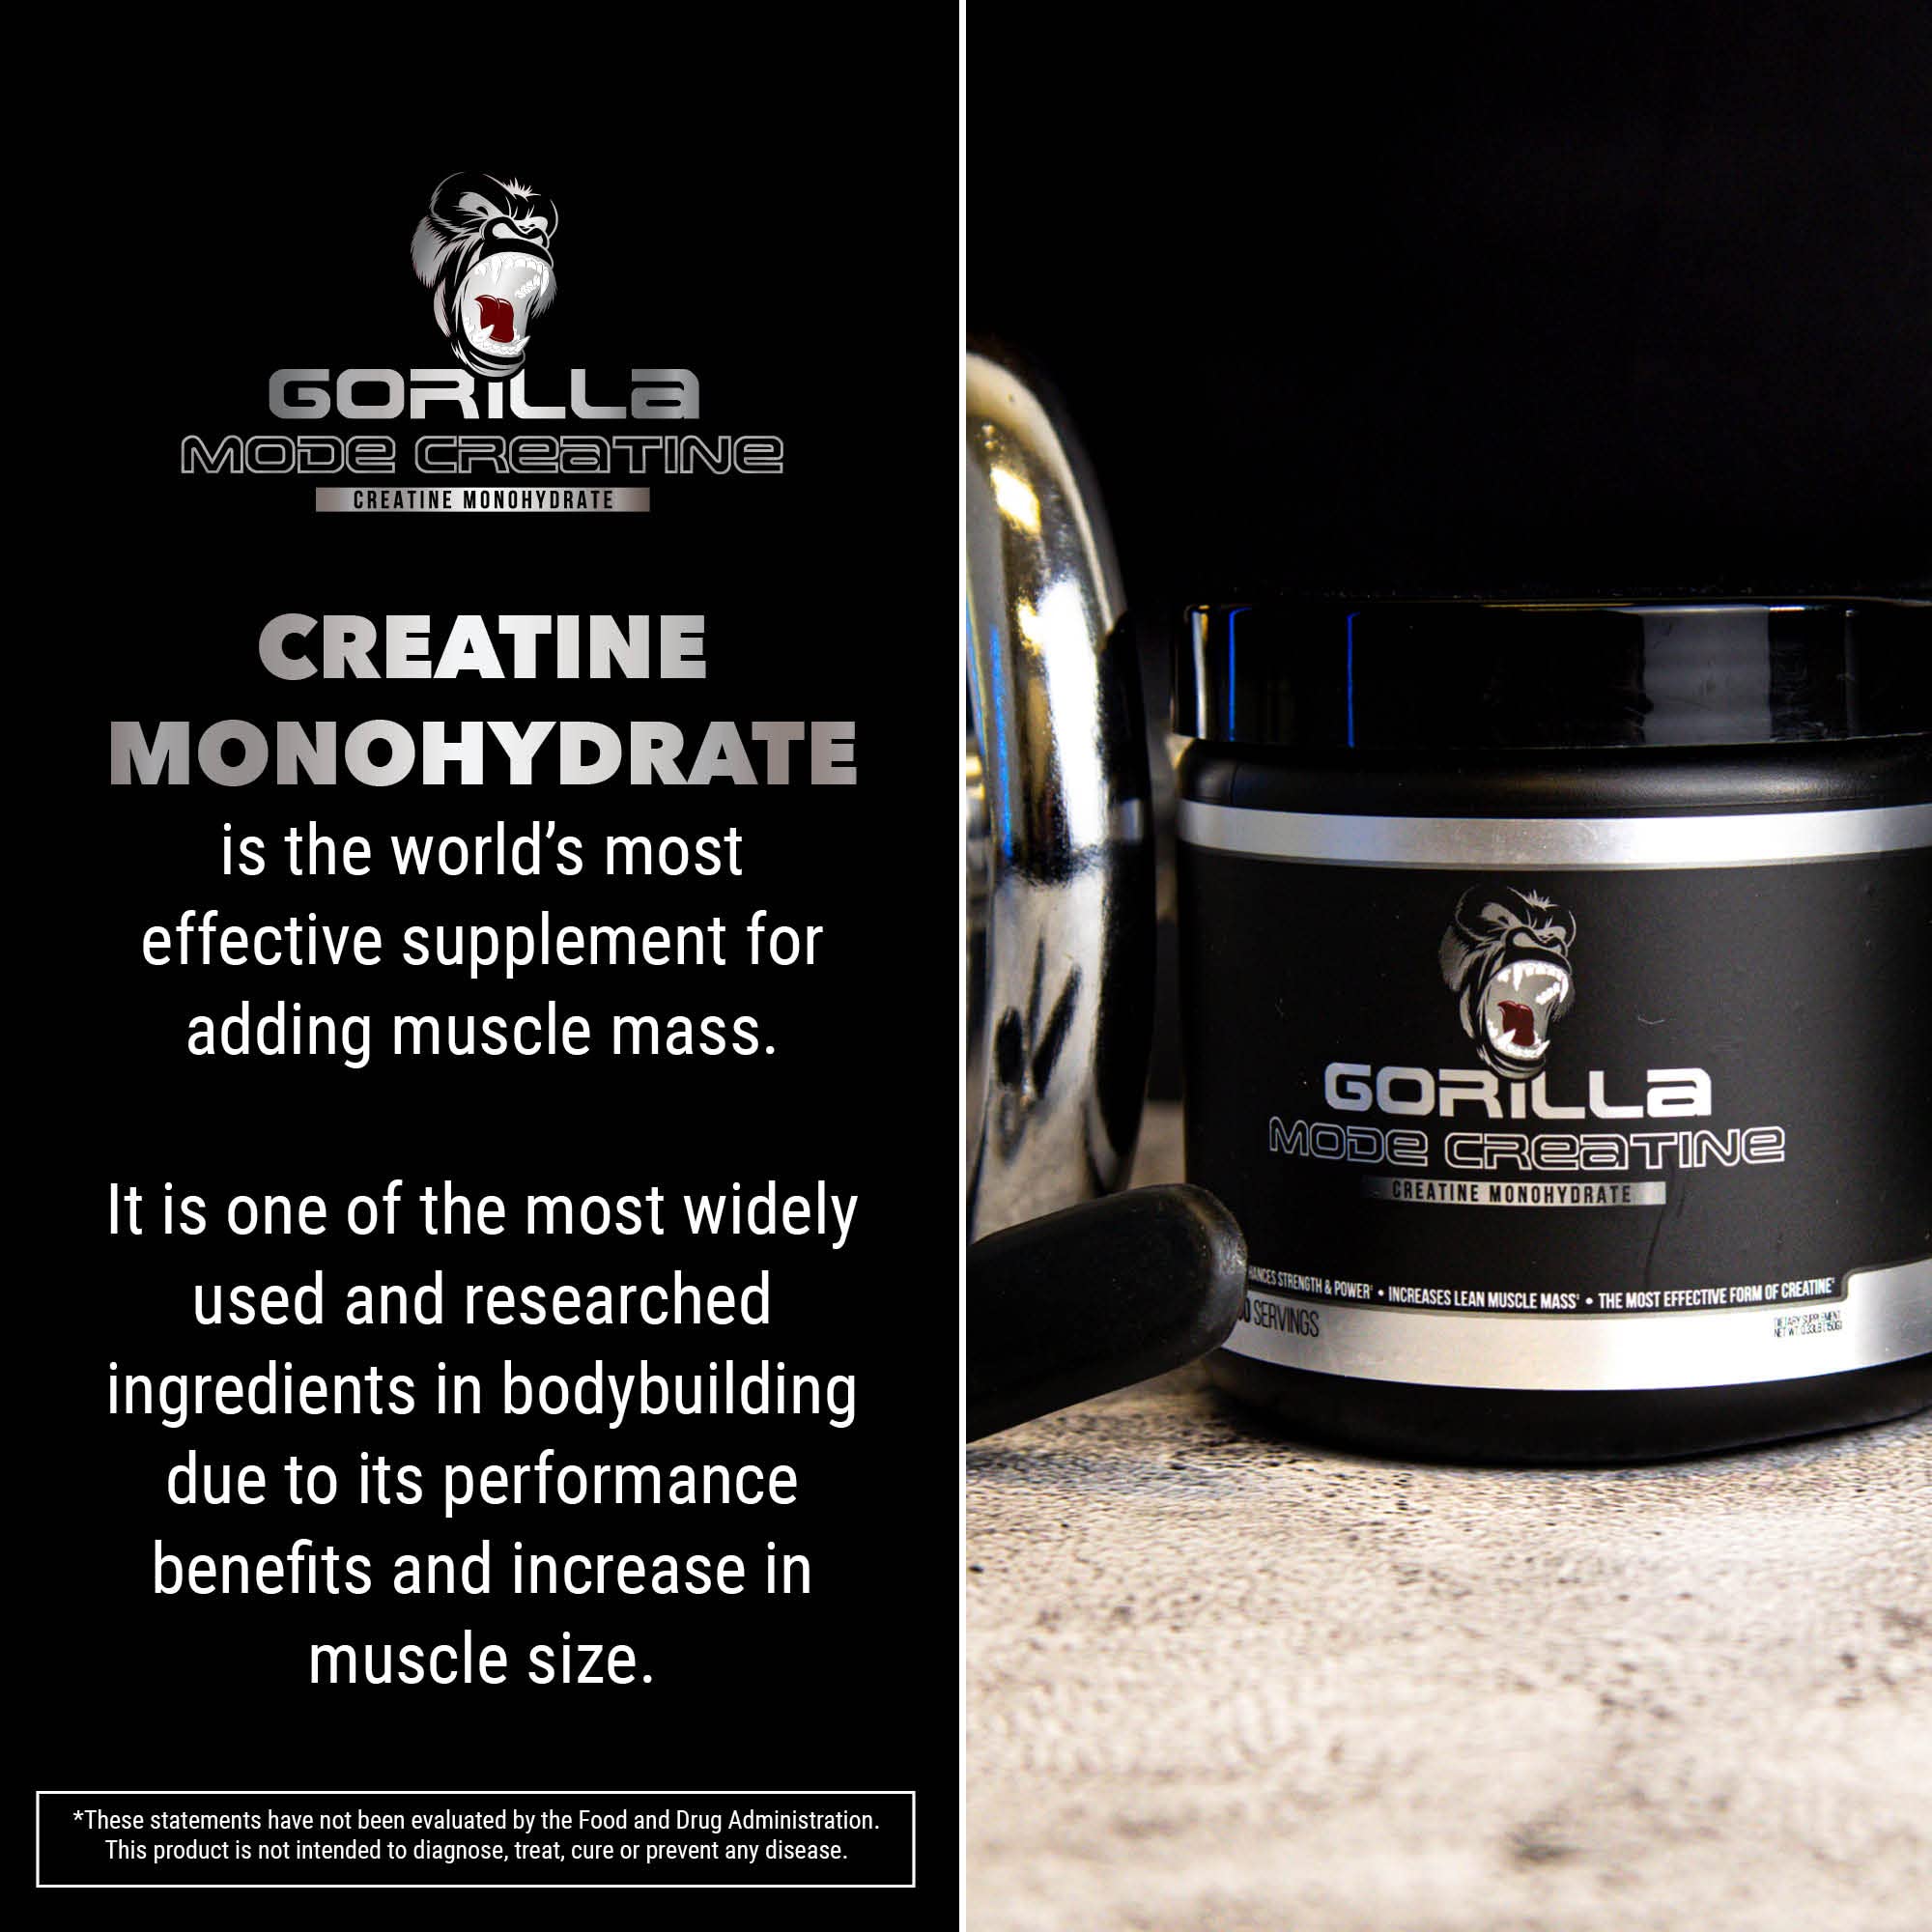 Gorilla Mind Gorilla Mode Creatine – Creatine Monohydrate Micronized Powder / Improved Muscle Size, Power Output and Strength / 5 Grams per Servings, 30 Servings